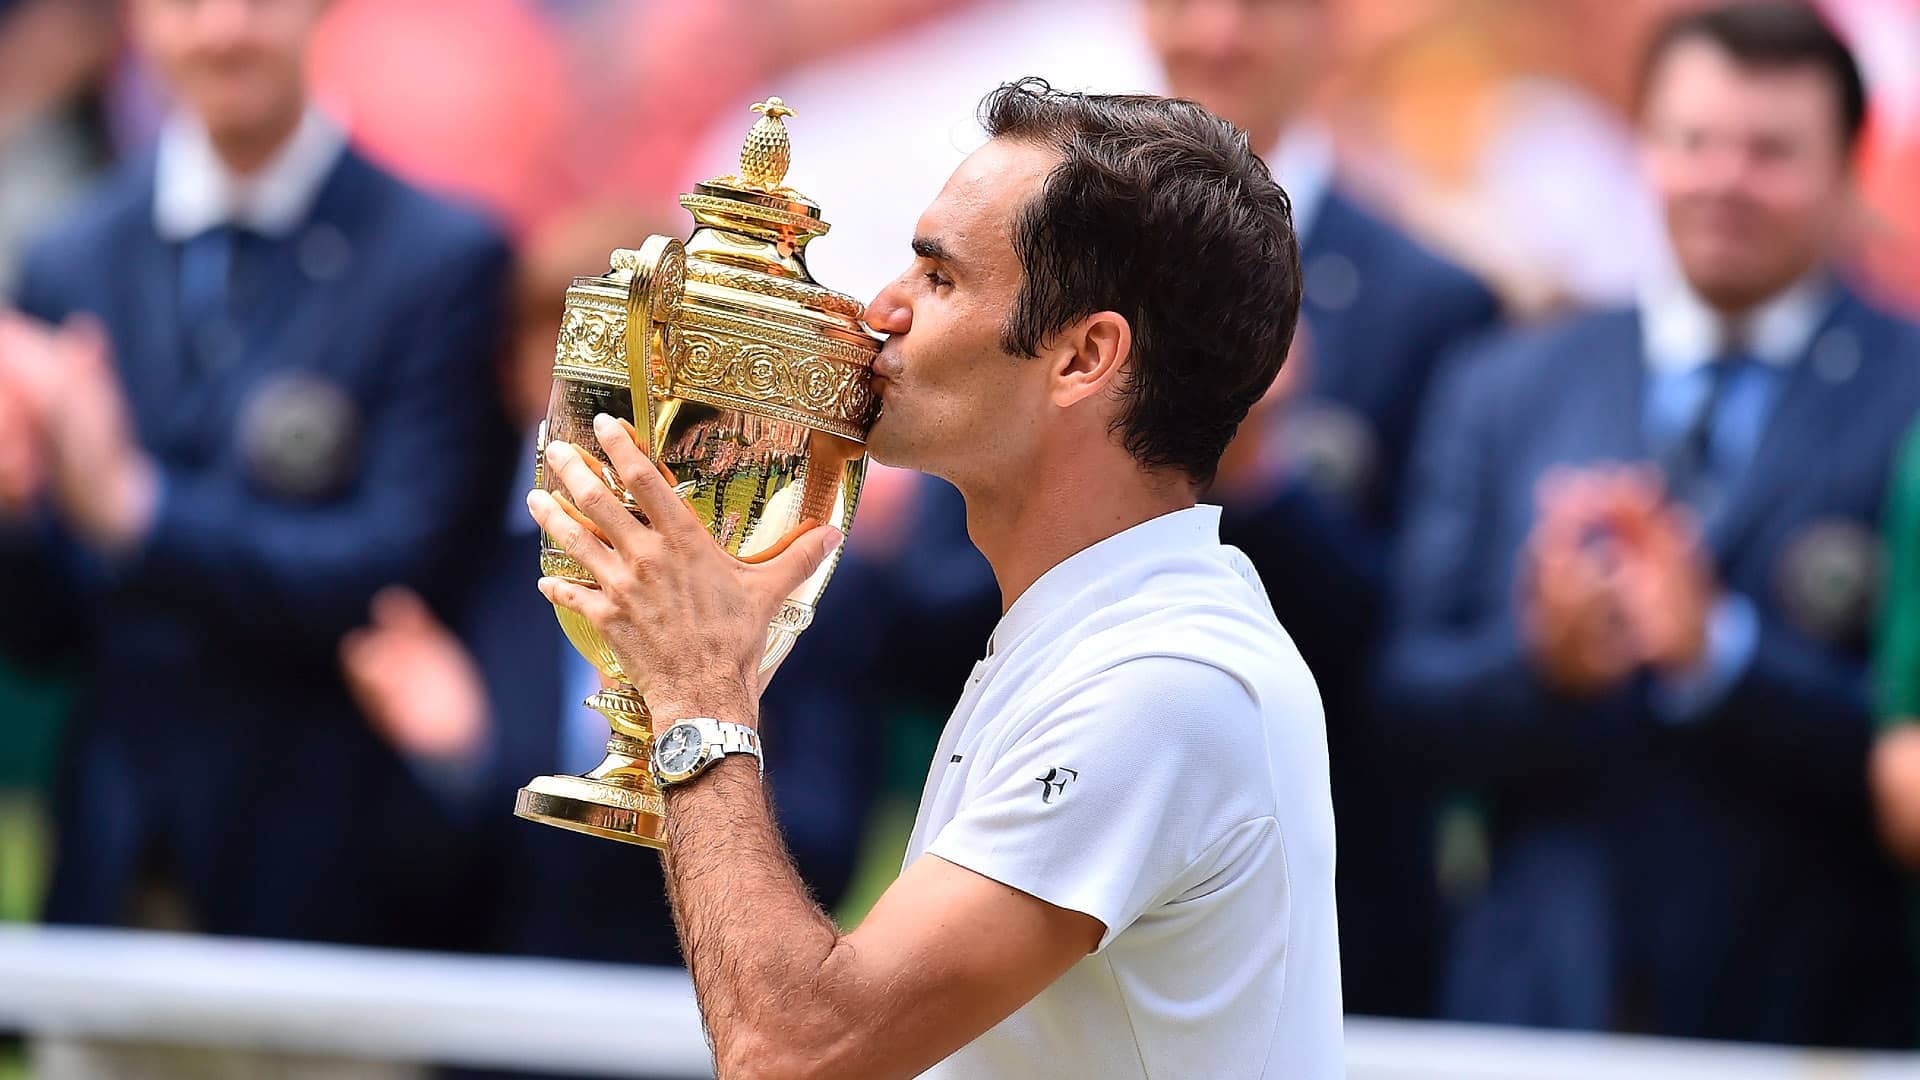 Roger Federer is reunited with the trophy as the 2017 Wimbledon Champion.